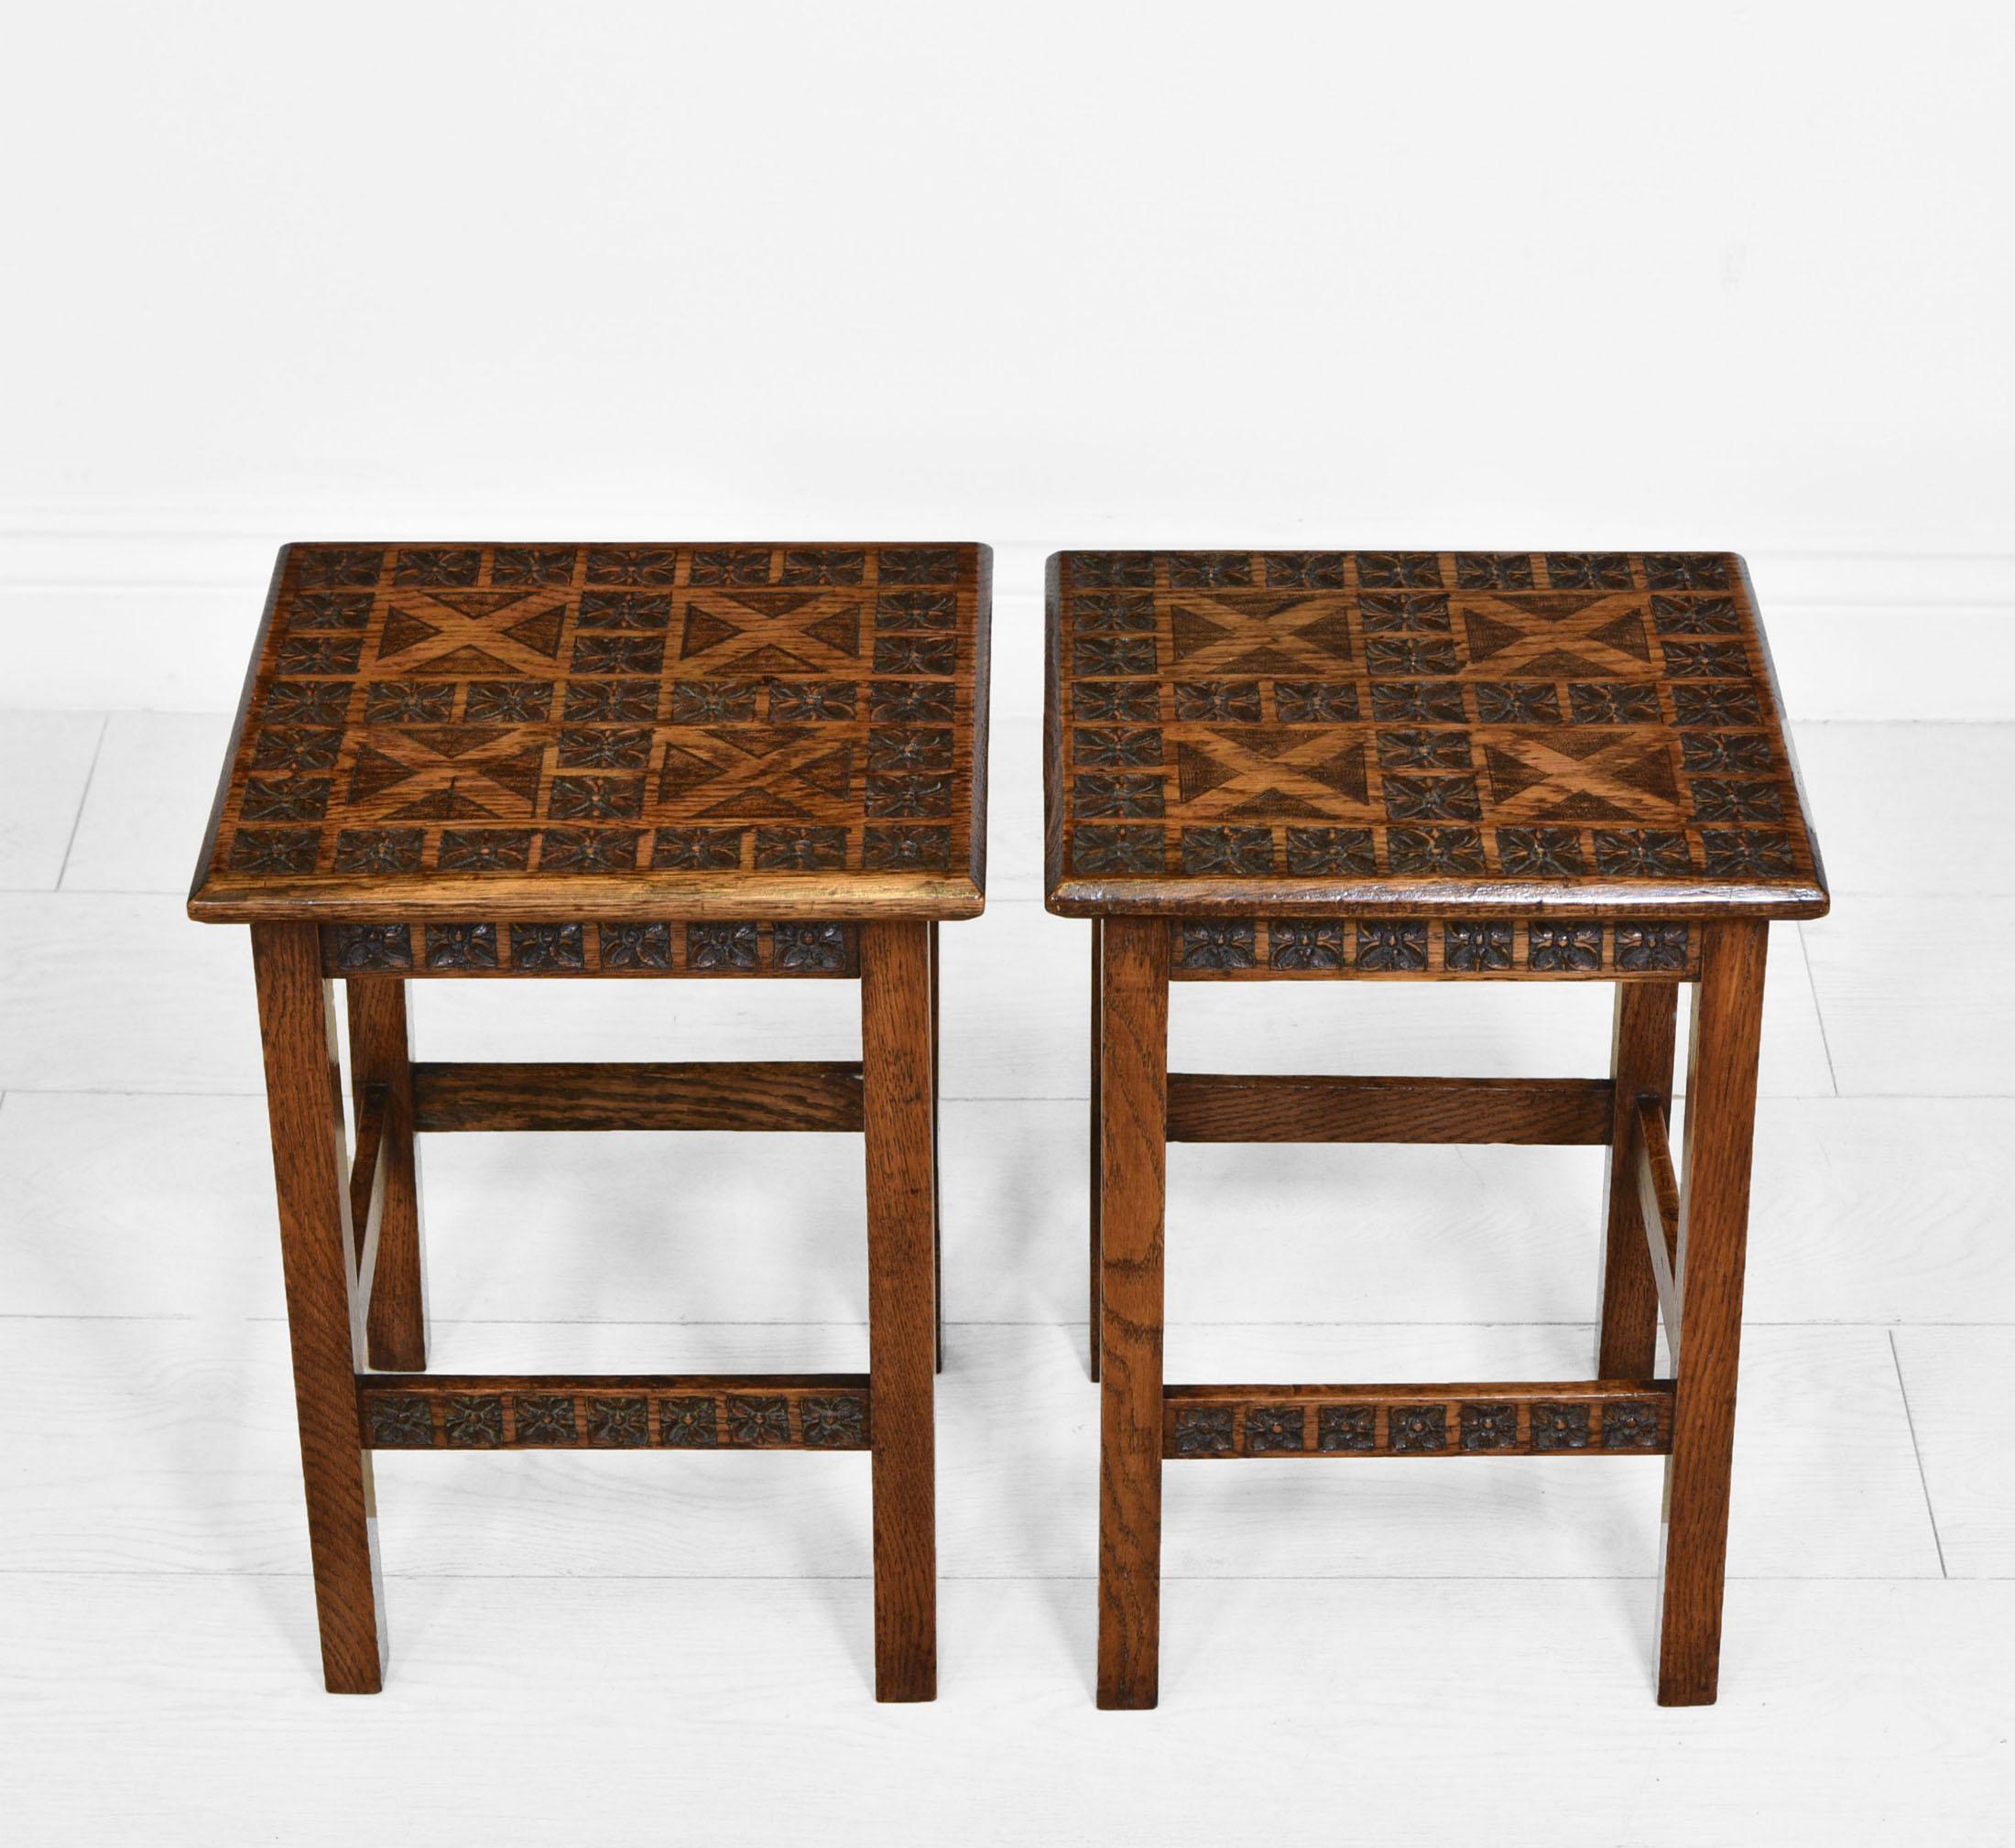 A fabulous and quite rare pair of oak stools from HM The Queen's Carving School at Sandringham. Circa 1945.

Free U.K. shipping.

Overall they are in very good condition, and have been cleaned and waxed. Both are very sturdy in structure with no